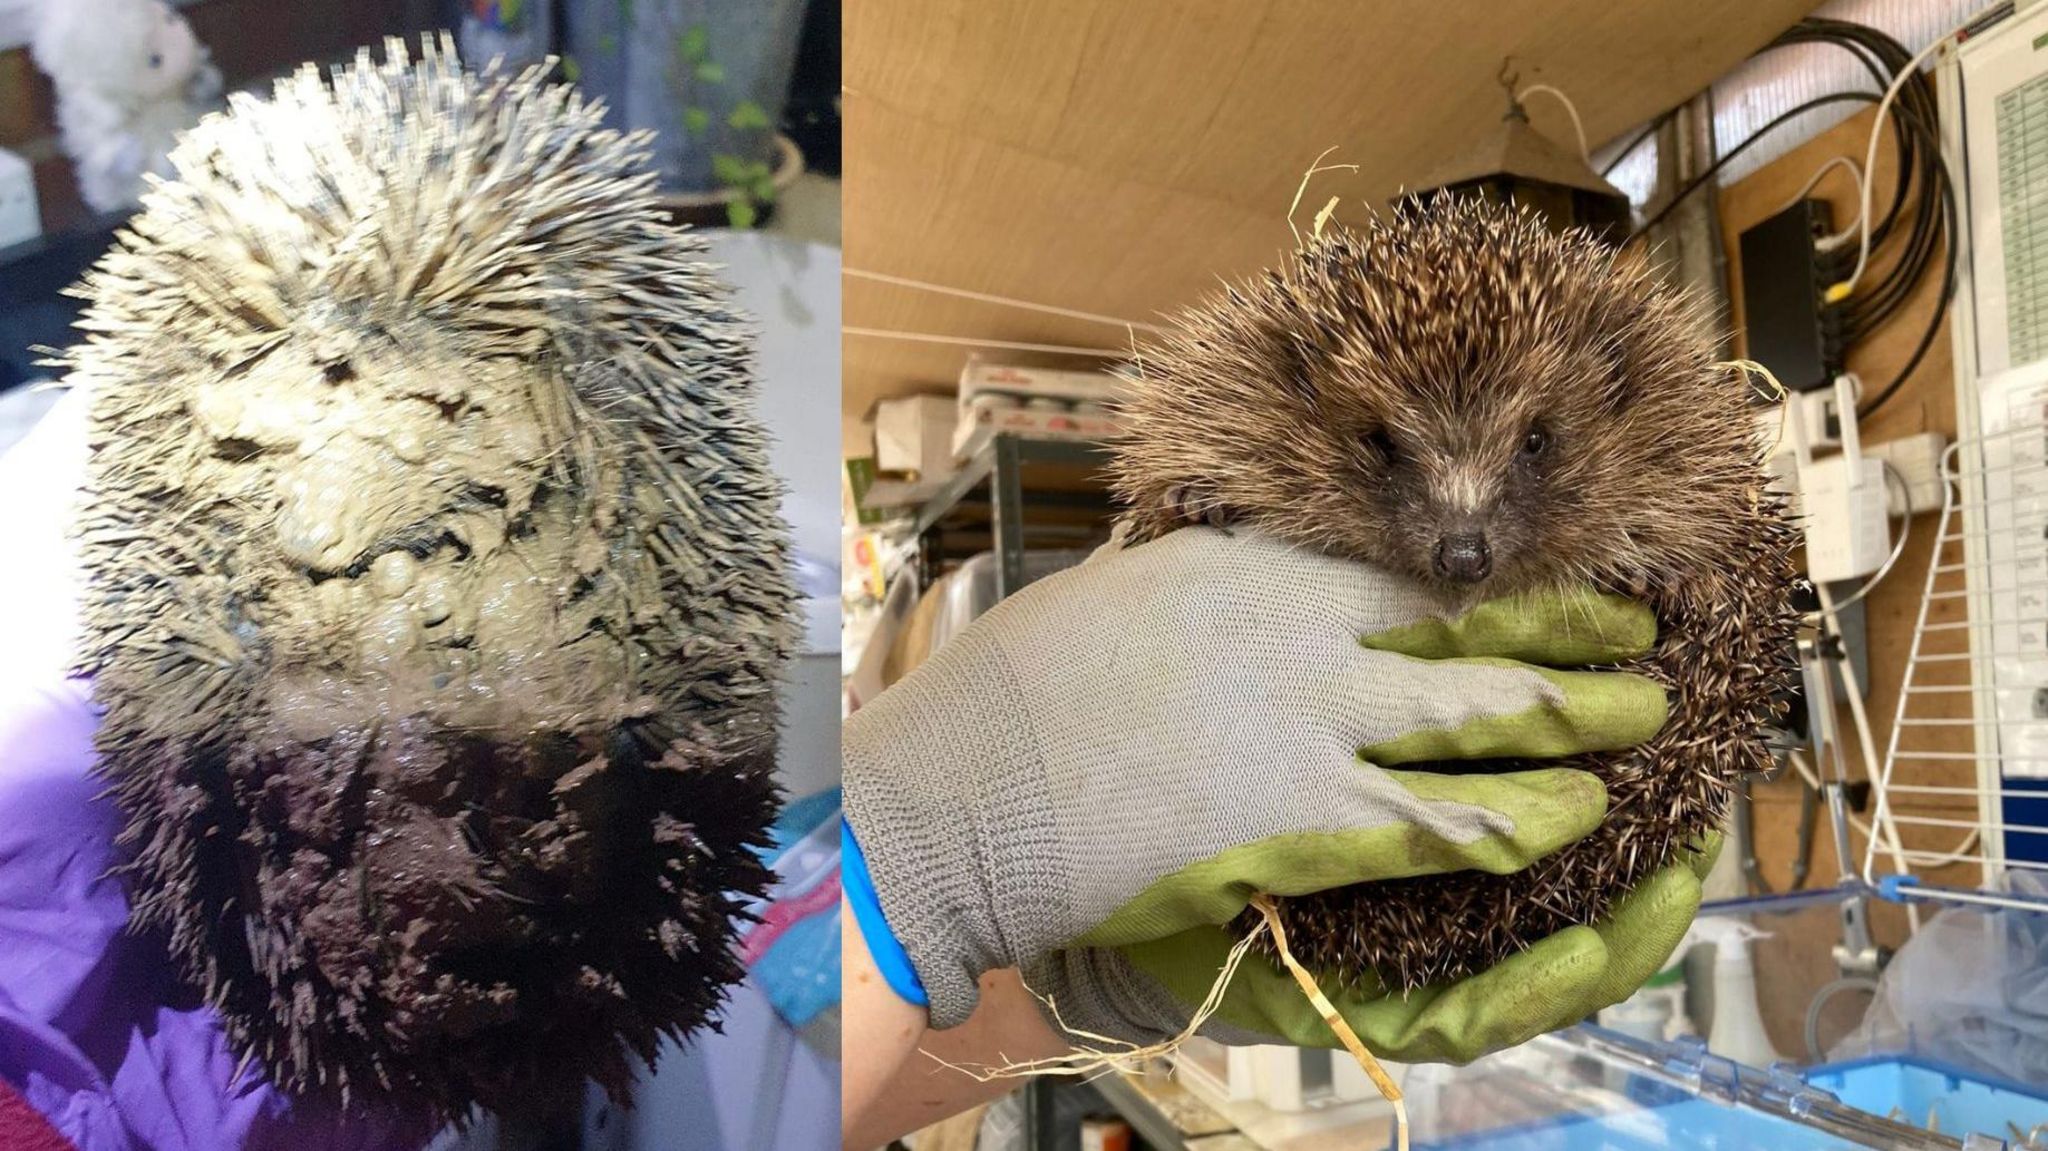 A side by side photo of Hope the hedgehog when she was found muddy and cold, and when she was released at a healthy weight